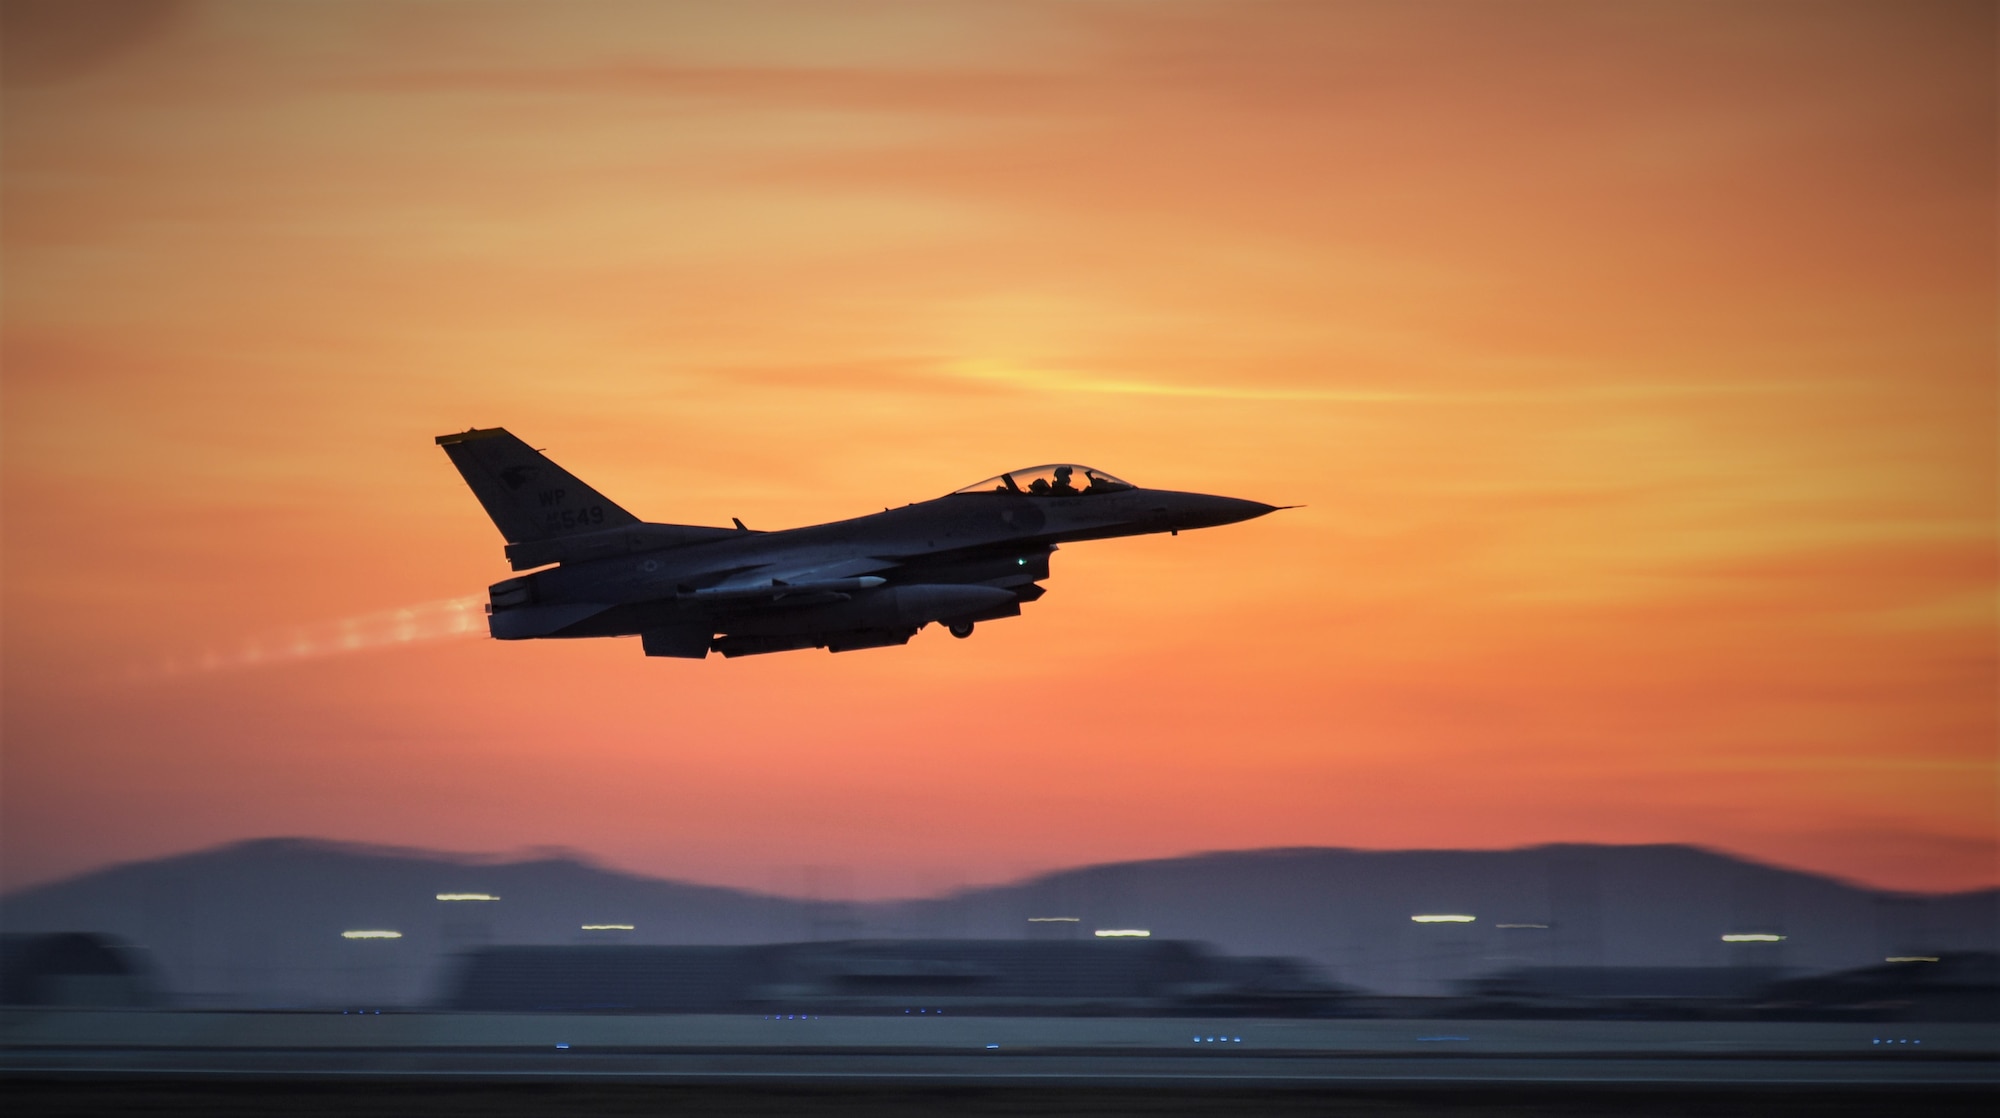 An 8th Fighter Wing F-16 Fighting Falcon takes off during a routine training event at Kunsan Air Base, Republic of Korea, March 24, 2021. The F-16 Fighting Falcon is a compact, multi-role fighter aircraft that is highly maneuverable in air-to-air combat and air-to-surface attack. It can reach top speeds of 1,500 mph and can reach altitudes of more than 50,000 feet. (U.S. Air Force photo by Tech. Sgt. Kristin S. High)